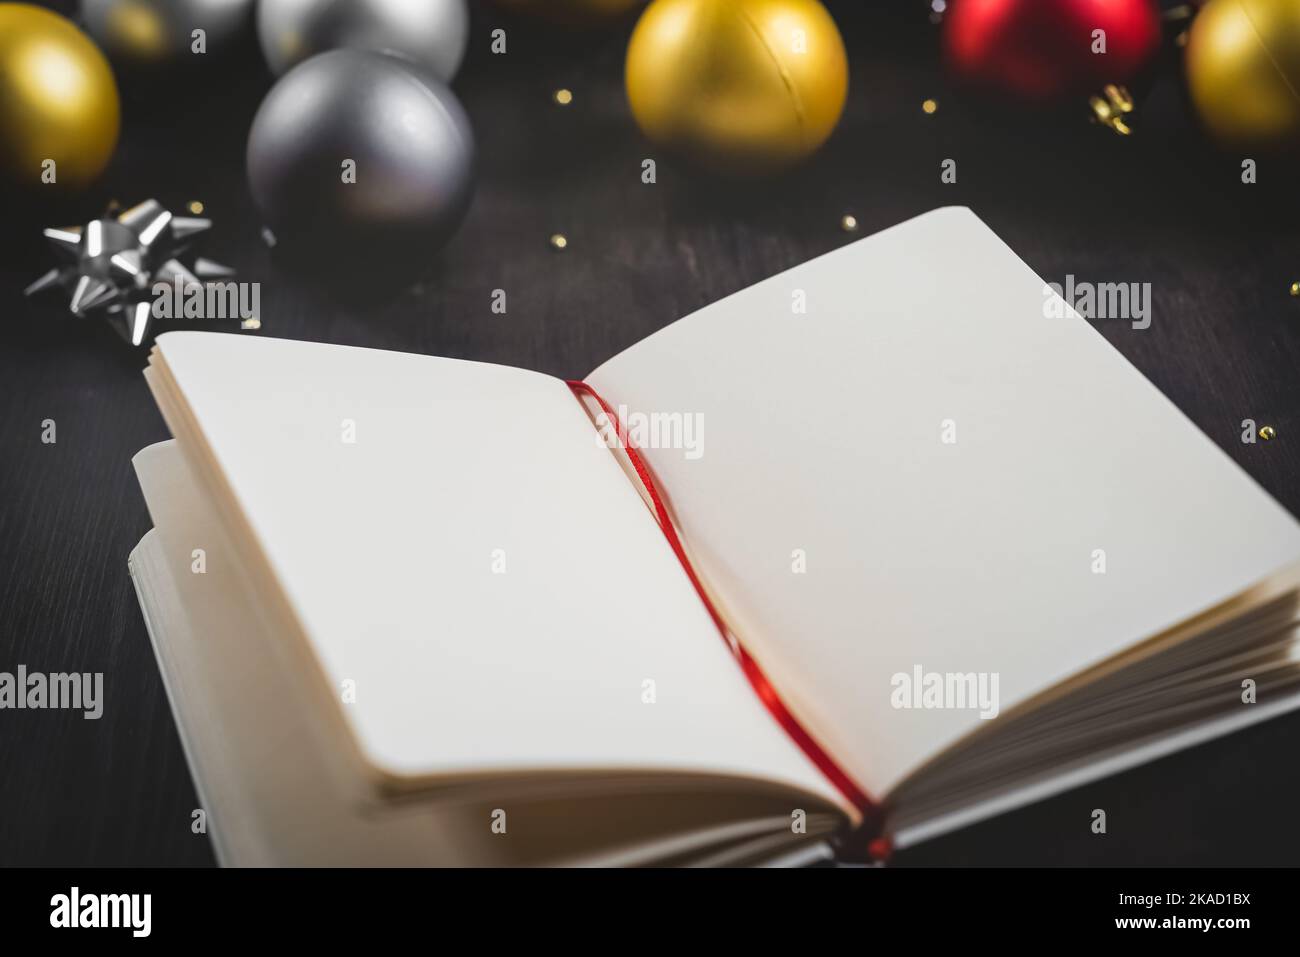 New Year concept and background with Christmas ornaments and notebook. Stock Photo